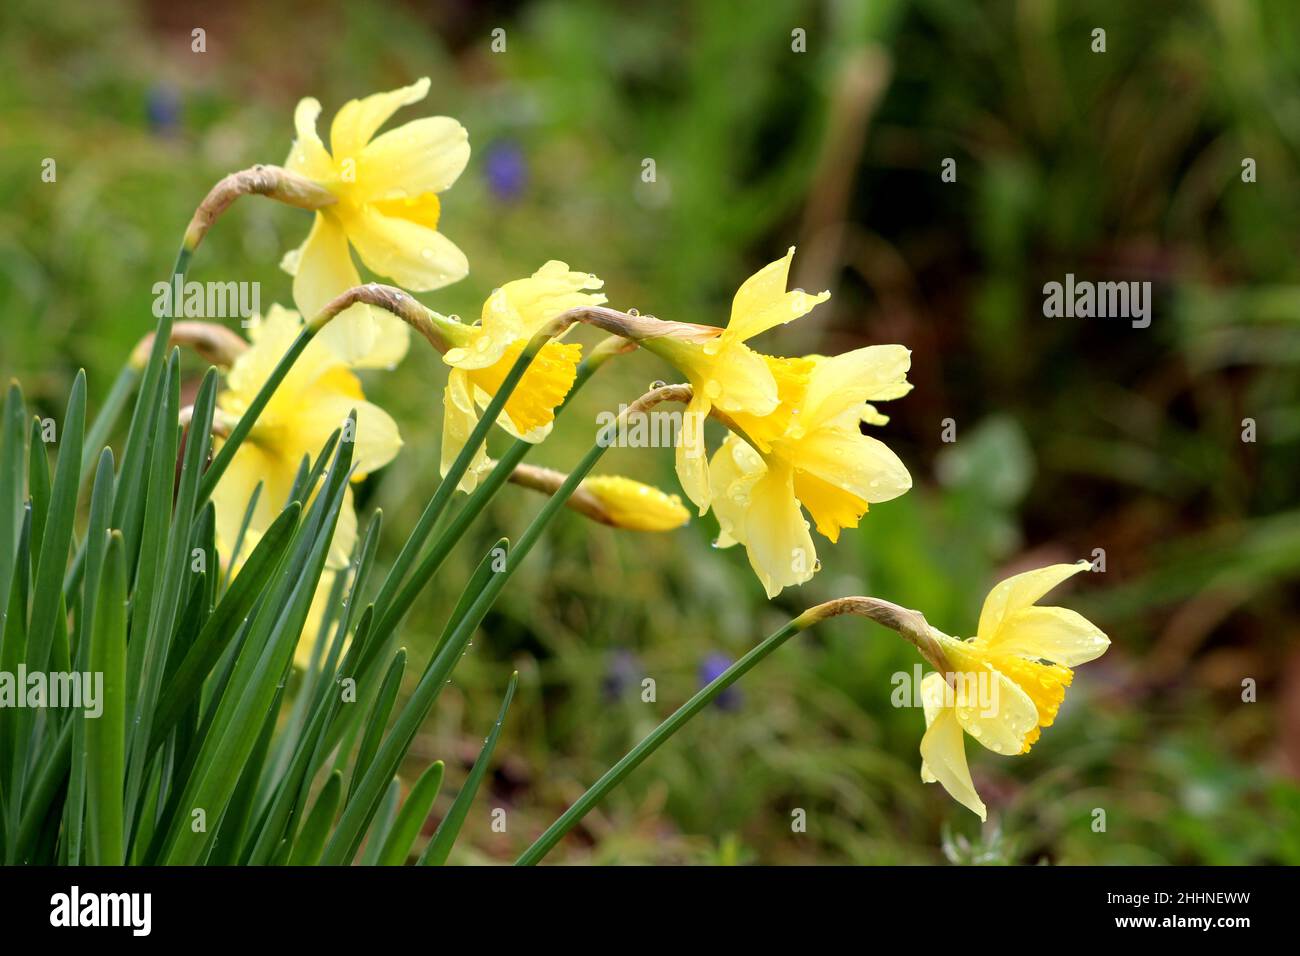 Bunch of Narcissus or Daffodil or Daffadowndilly bright yellow blooming flowers covered with raindrops growing in a row surrounded with dark green Stock Photo